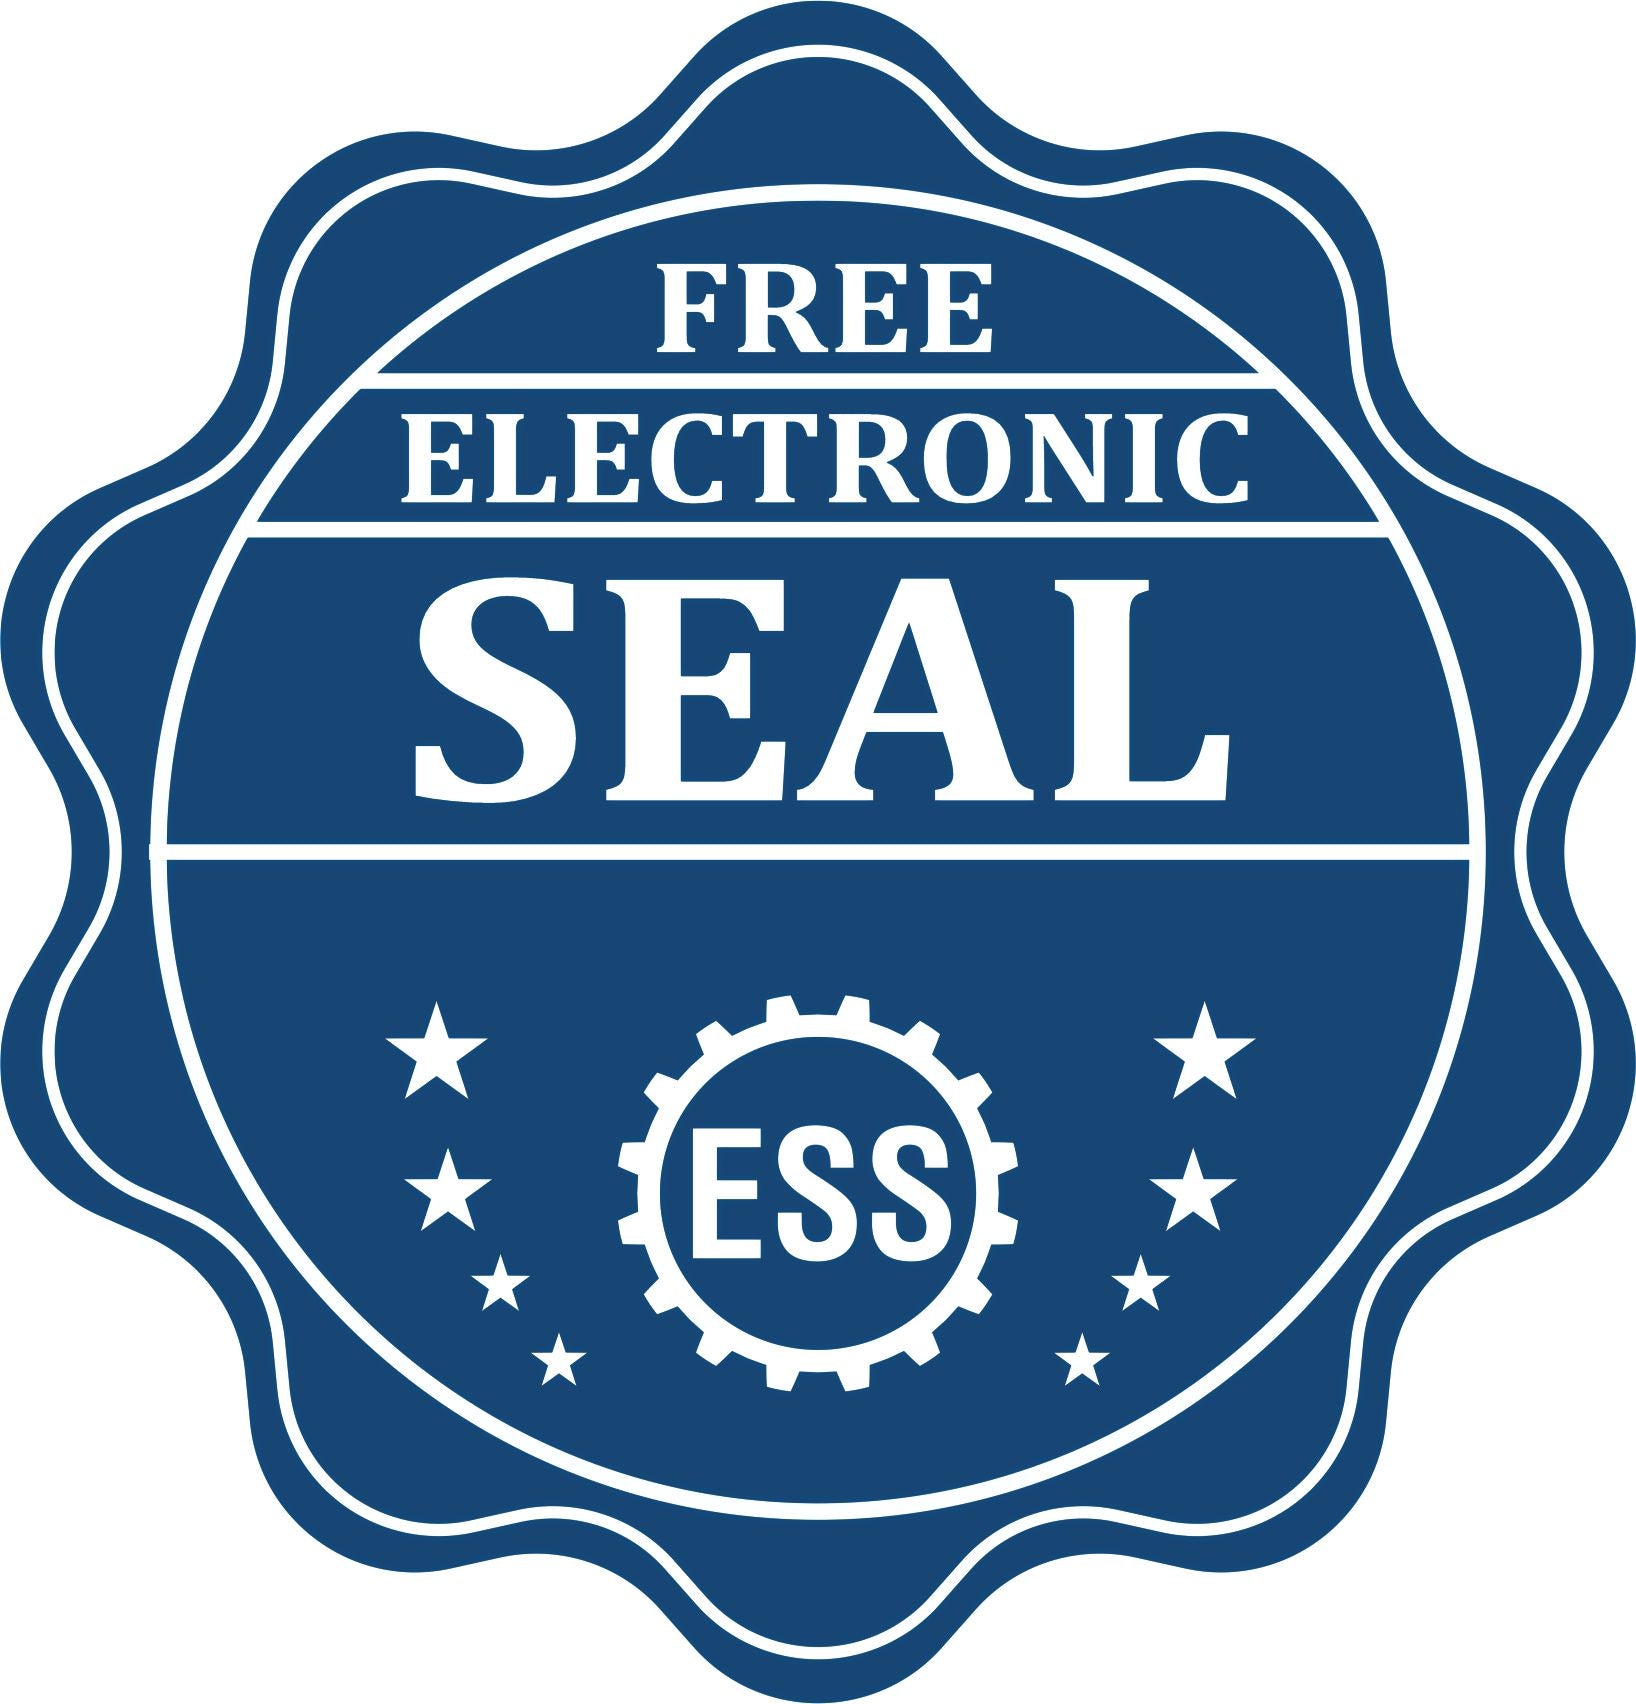 A badge showing a free electronic seal for the Hybrid Alabama Landscape Architect Seal with stars and the ESS gear on the emblem.